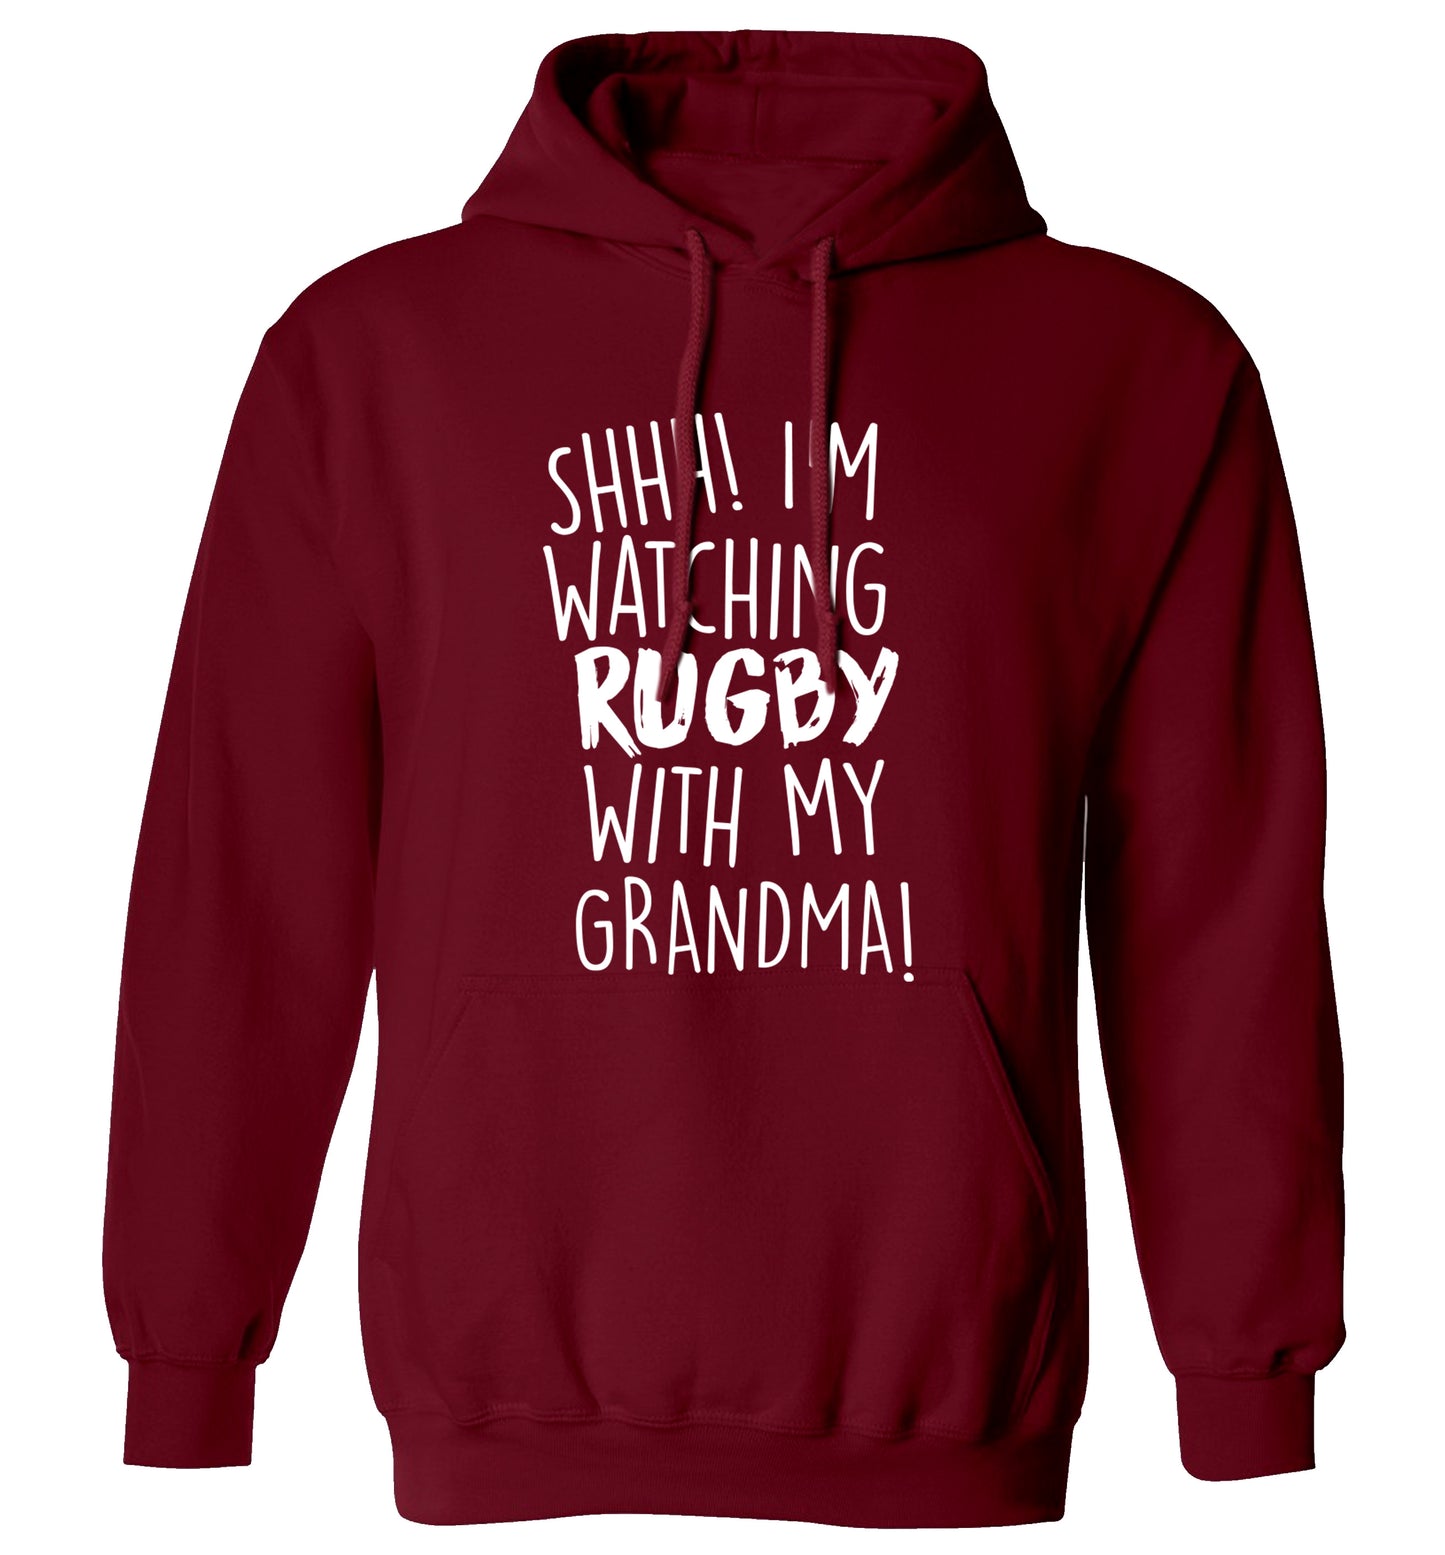 Shh I'm watching rugby with my grandma adults unisex maroon hoodie 2XL